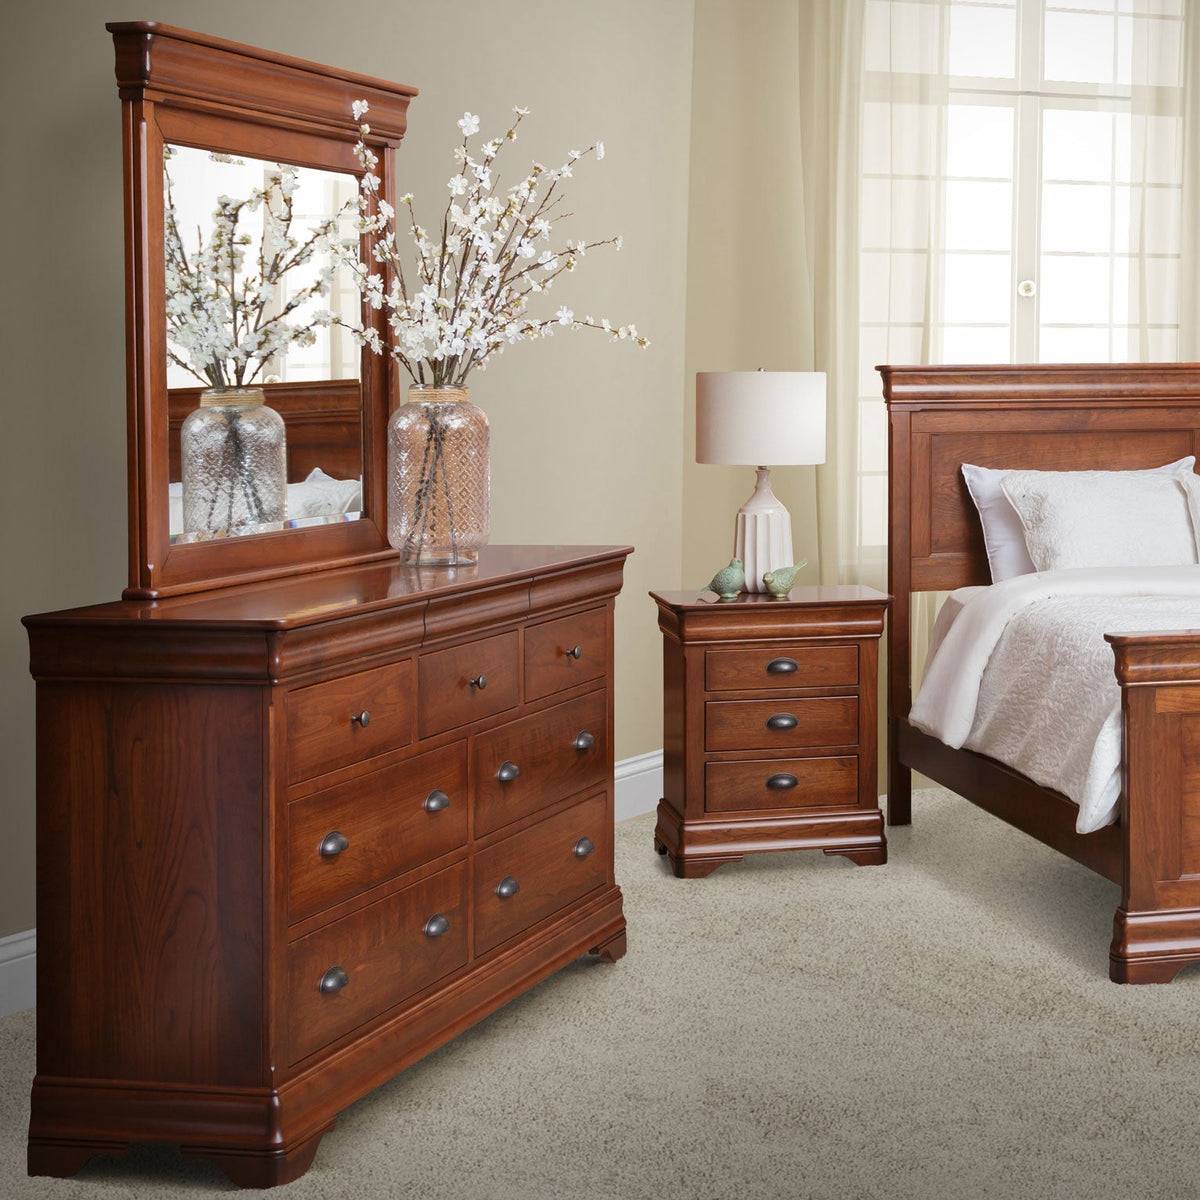 Amish Marseilles 4pc Wood Panel Queen Cherry Bedroom Set - snyders.furniture